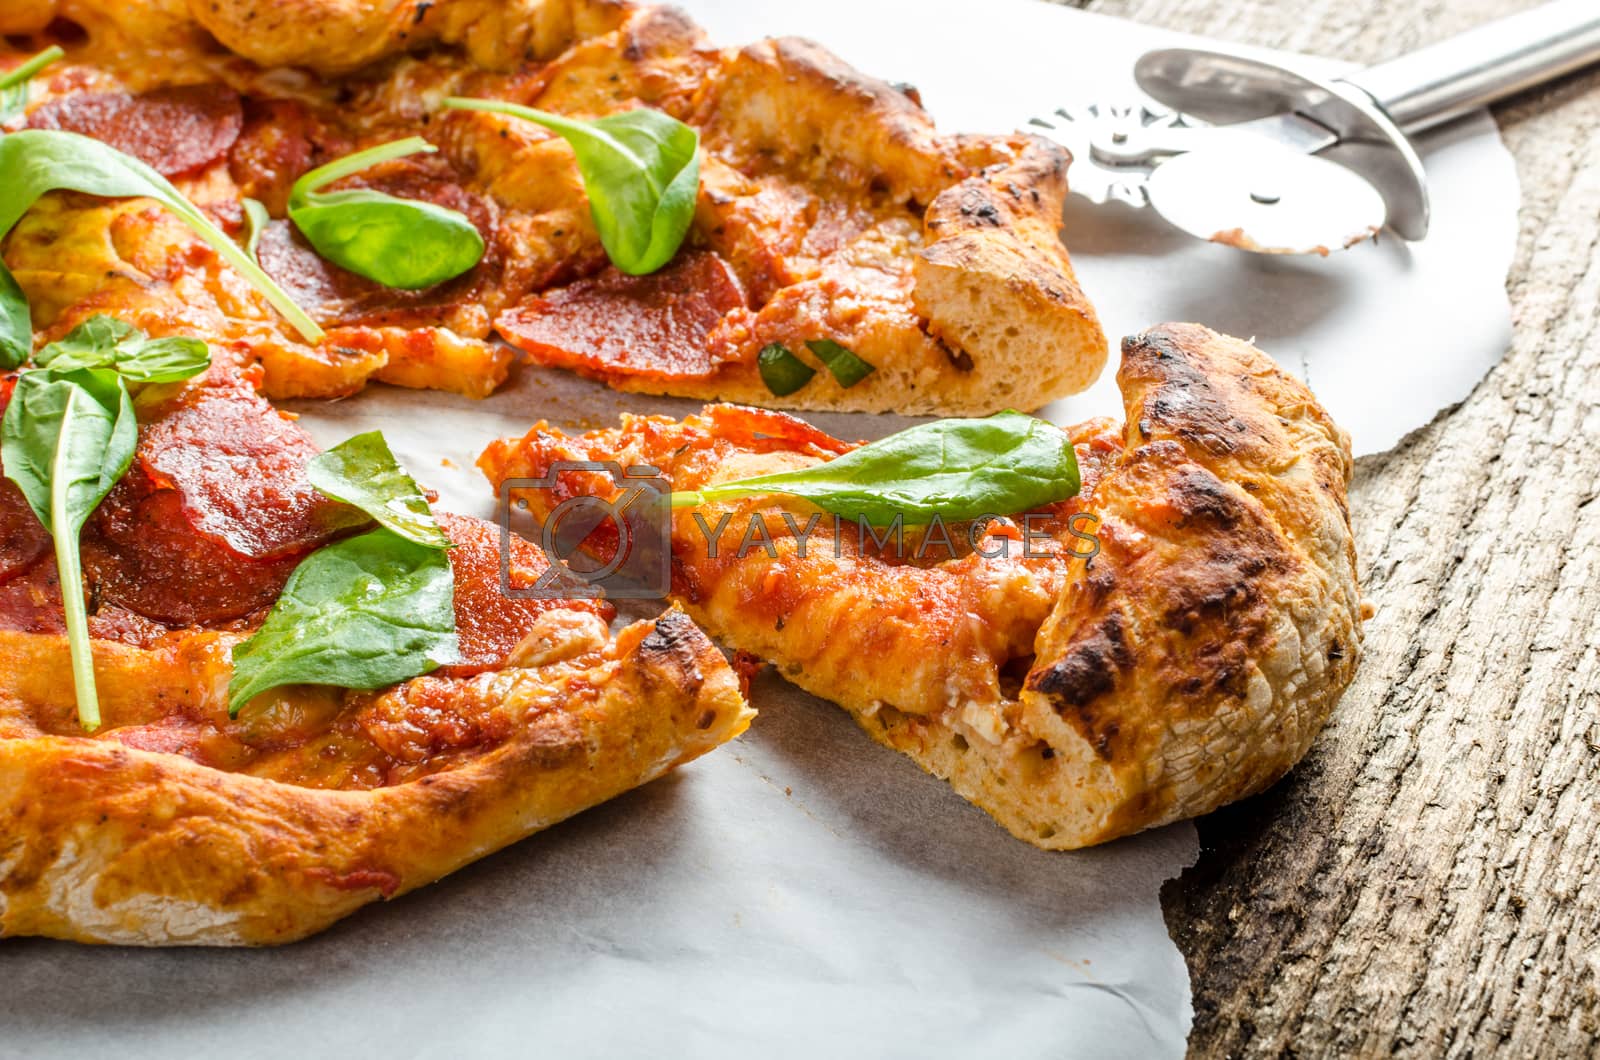 Royalty free image of Rustic pizza by Peteer